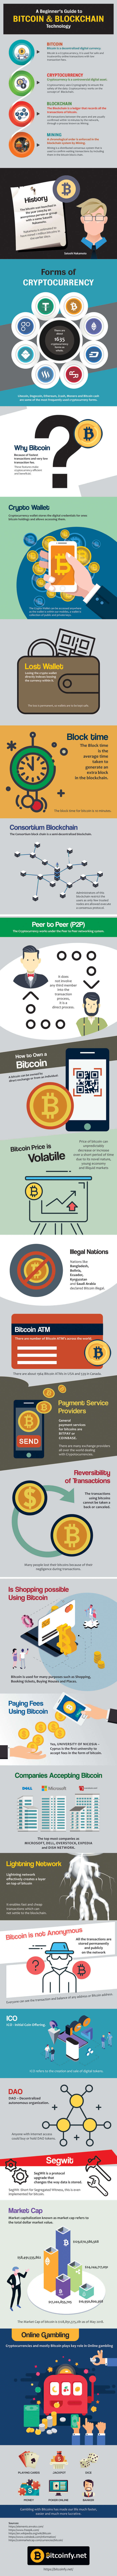 Bitcoin and Blockchain Technology (infographic)